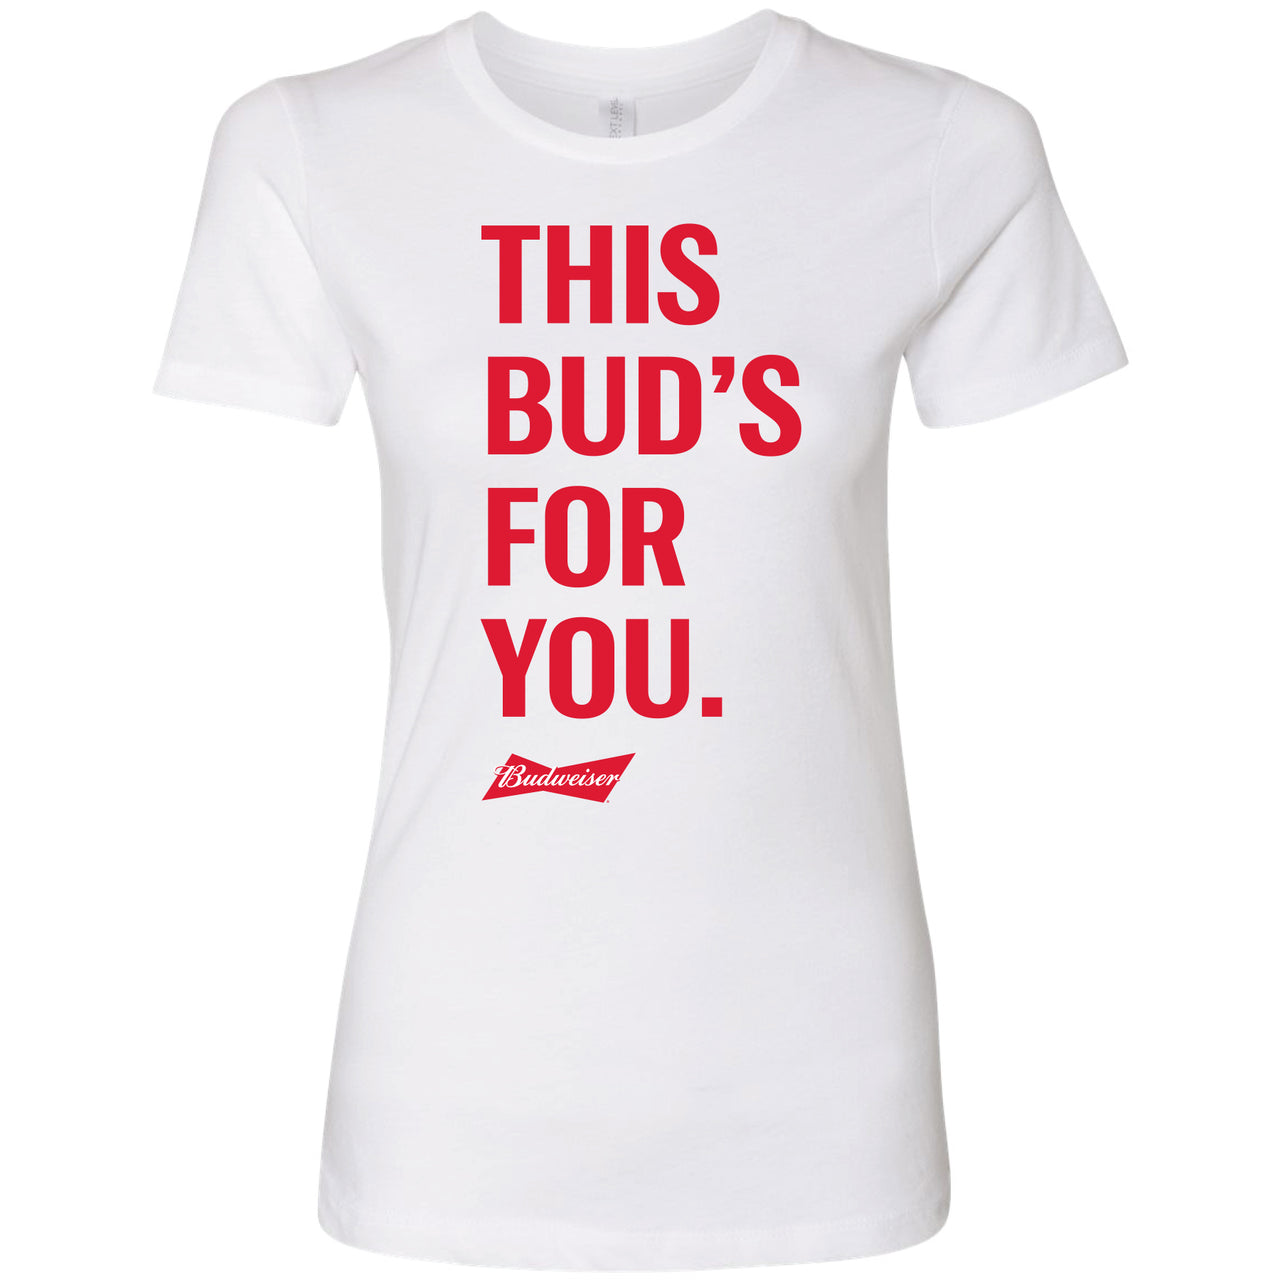 Budweiser - This Bud's For You Ladies T-Shirt